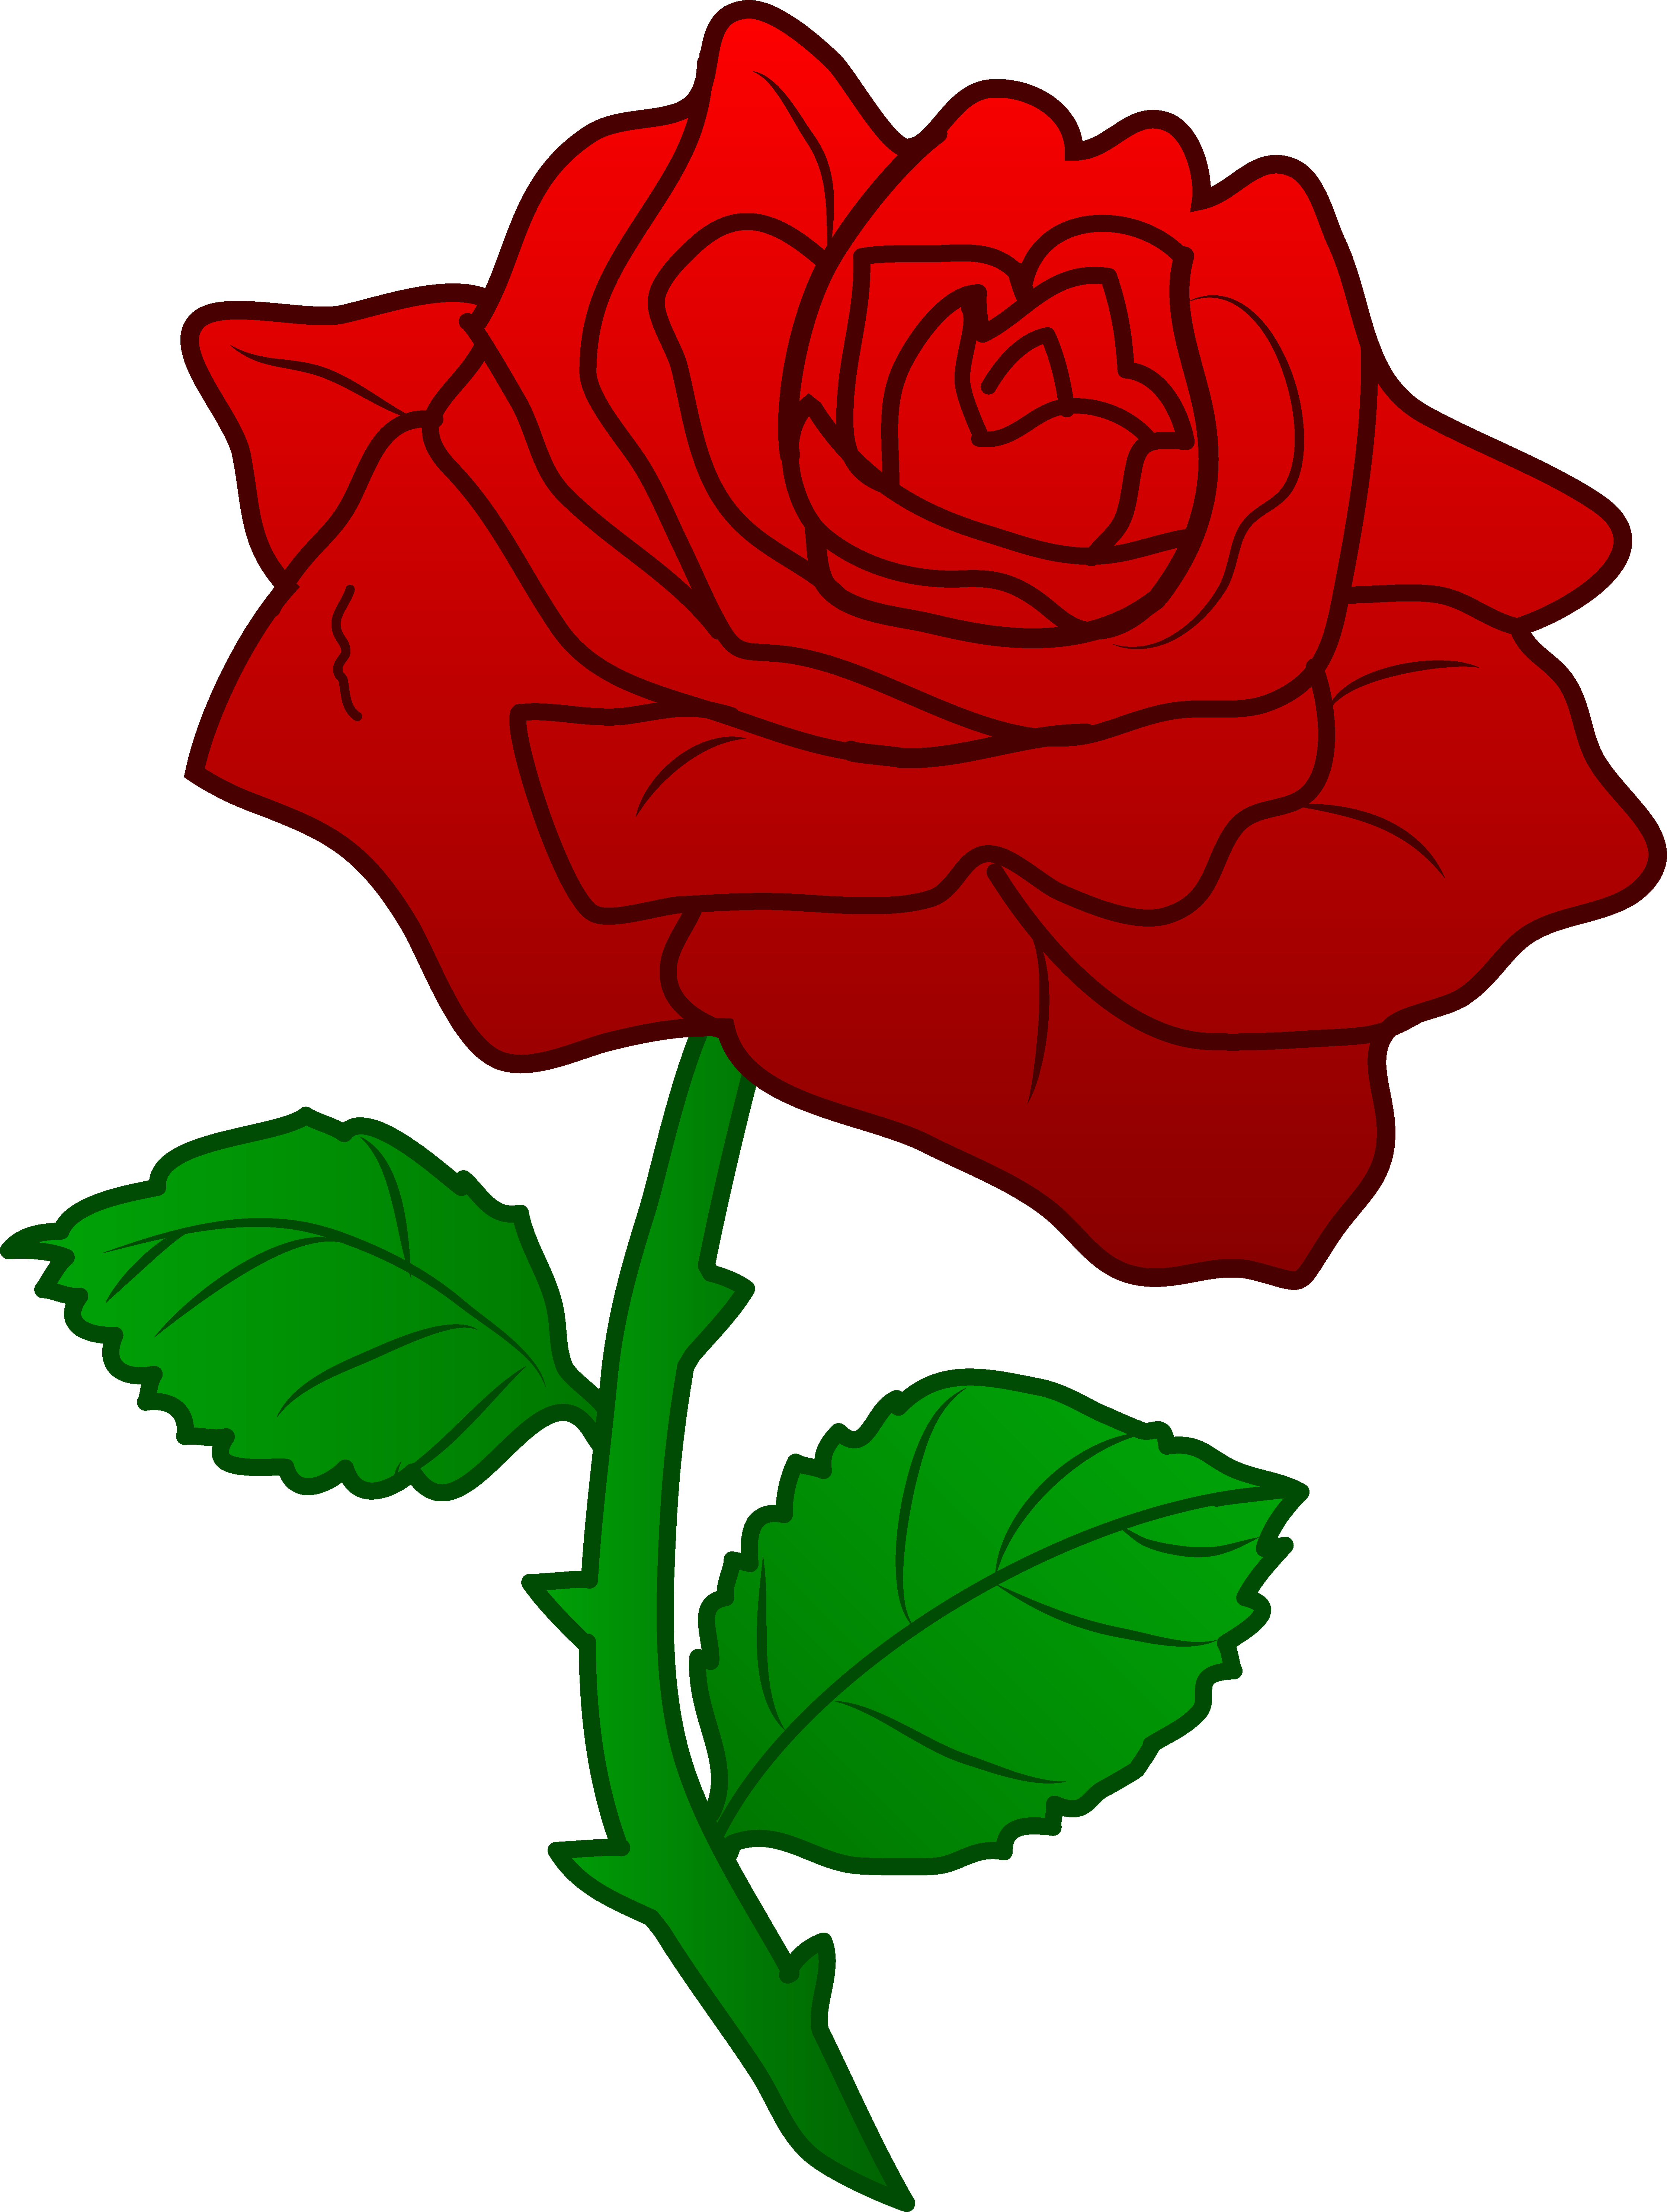 clipart rose - Clipart Roses